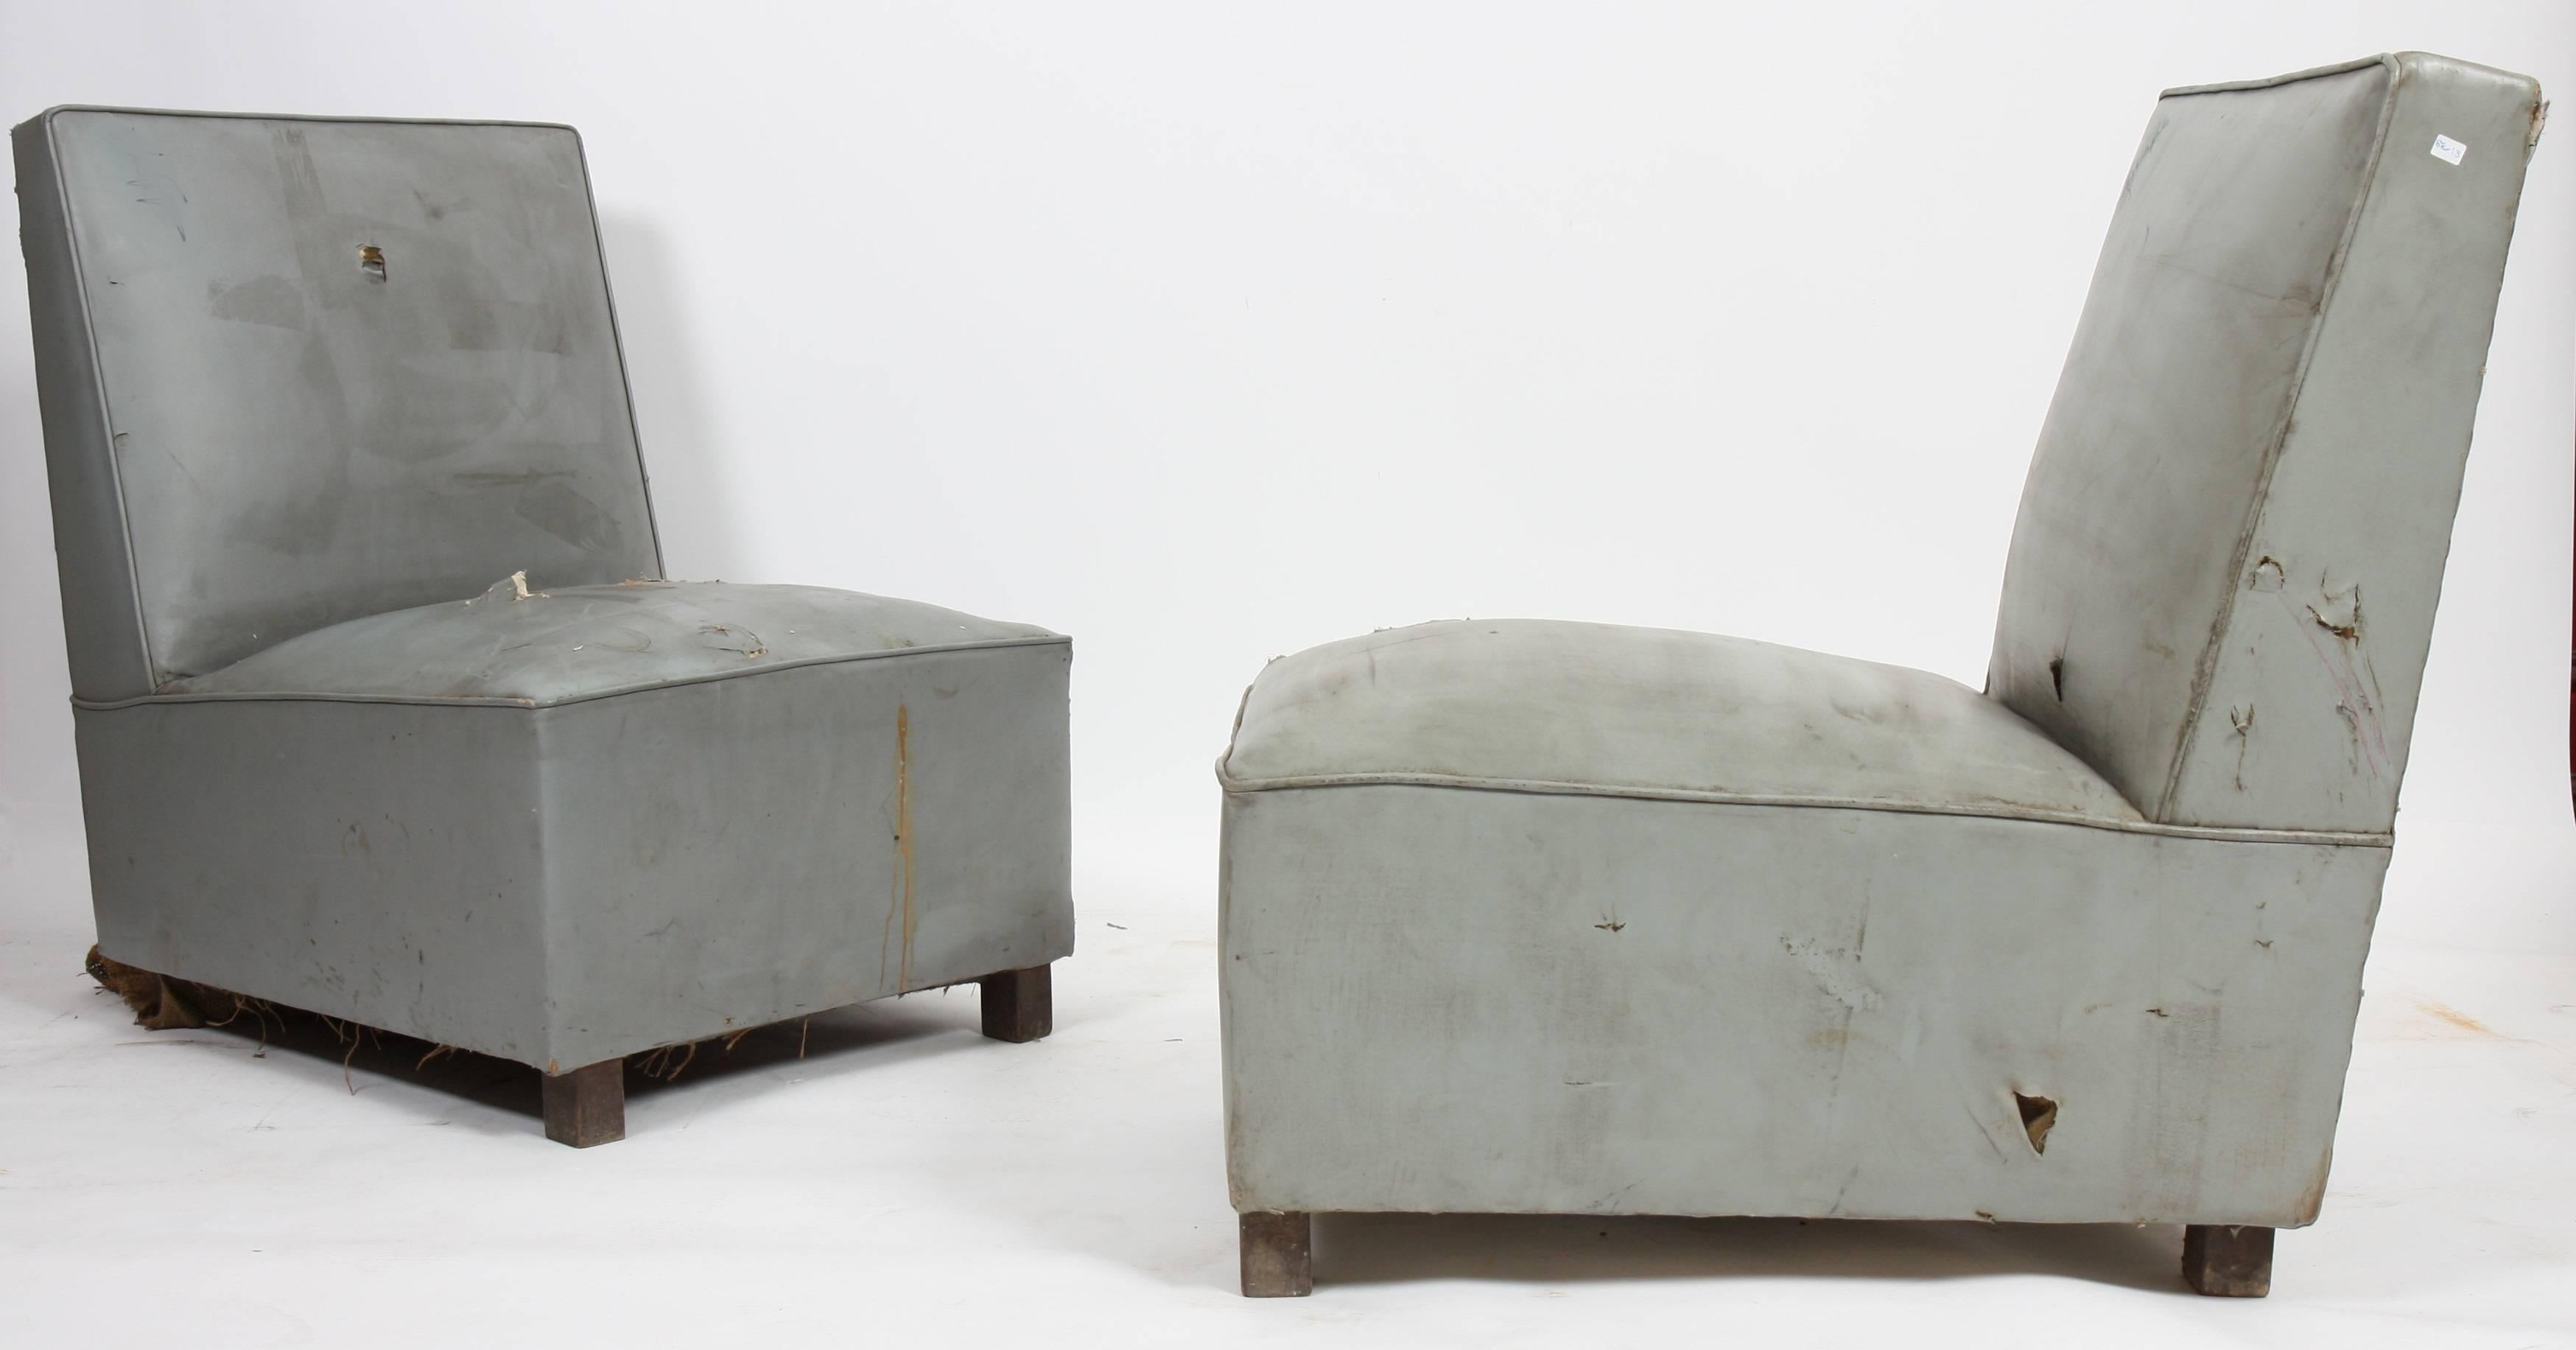 Pierre Jeanneret (1896-1967)
exceptional set of two lounge seats, asises and back
upholstered with a simili blue-grey.
Sold in unrestored condition.
Epoque 20th century.
Measures: H 78; L 58; P 72.

Provenance: Chandigarh, India.